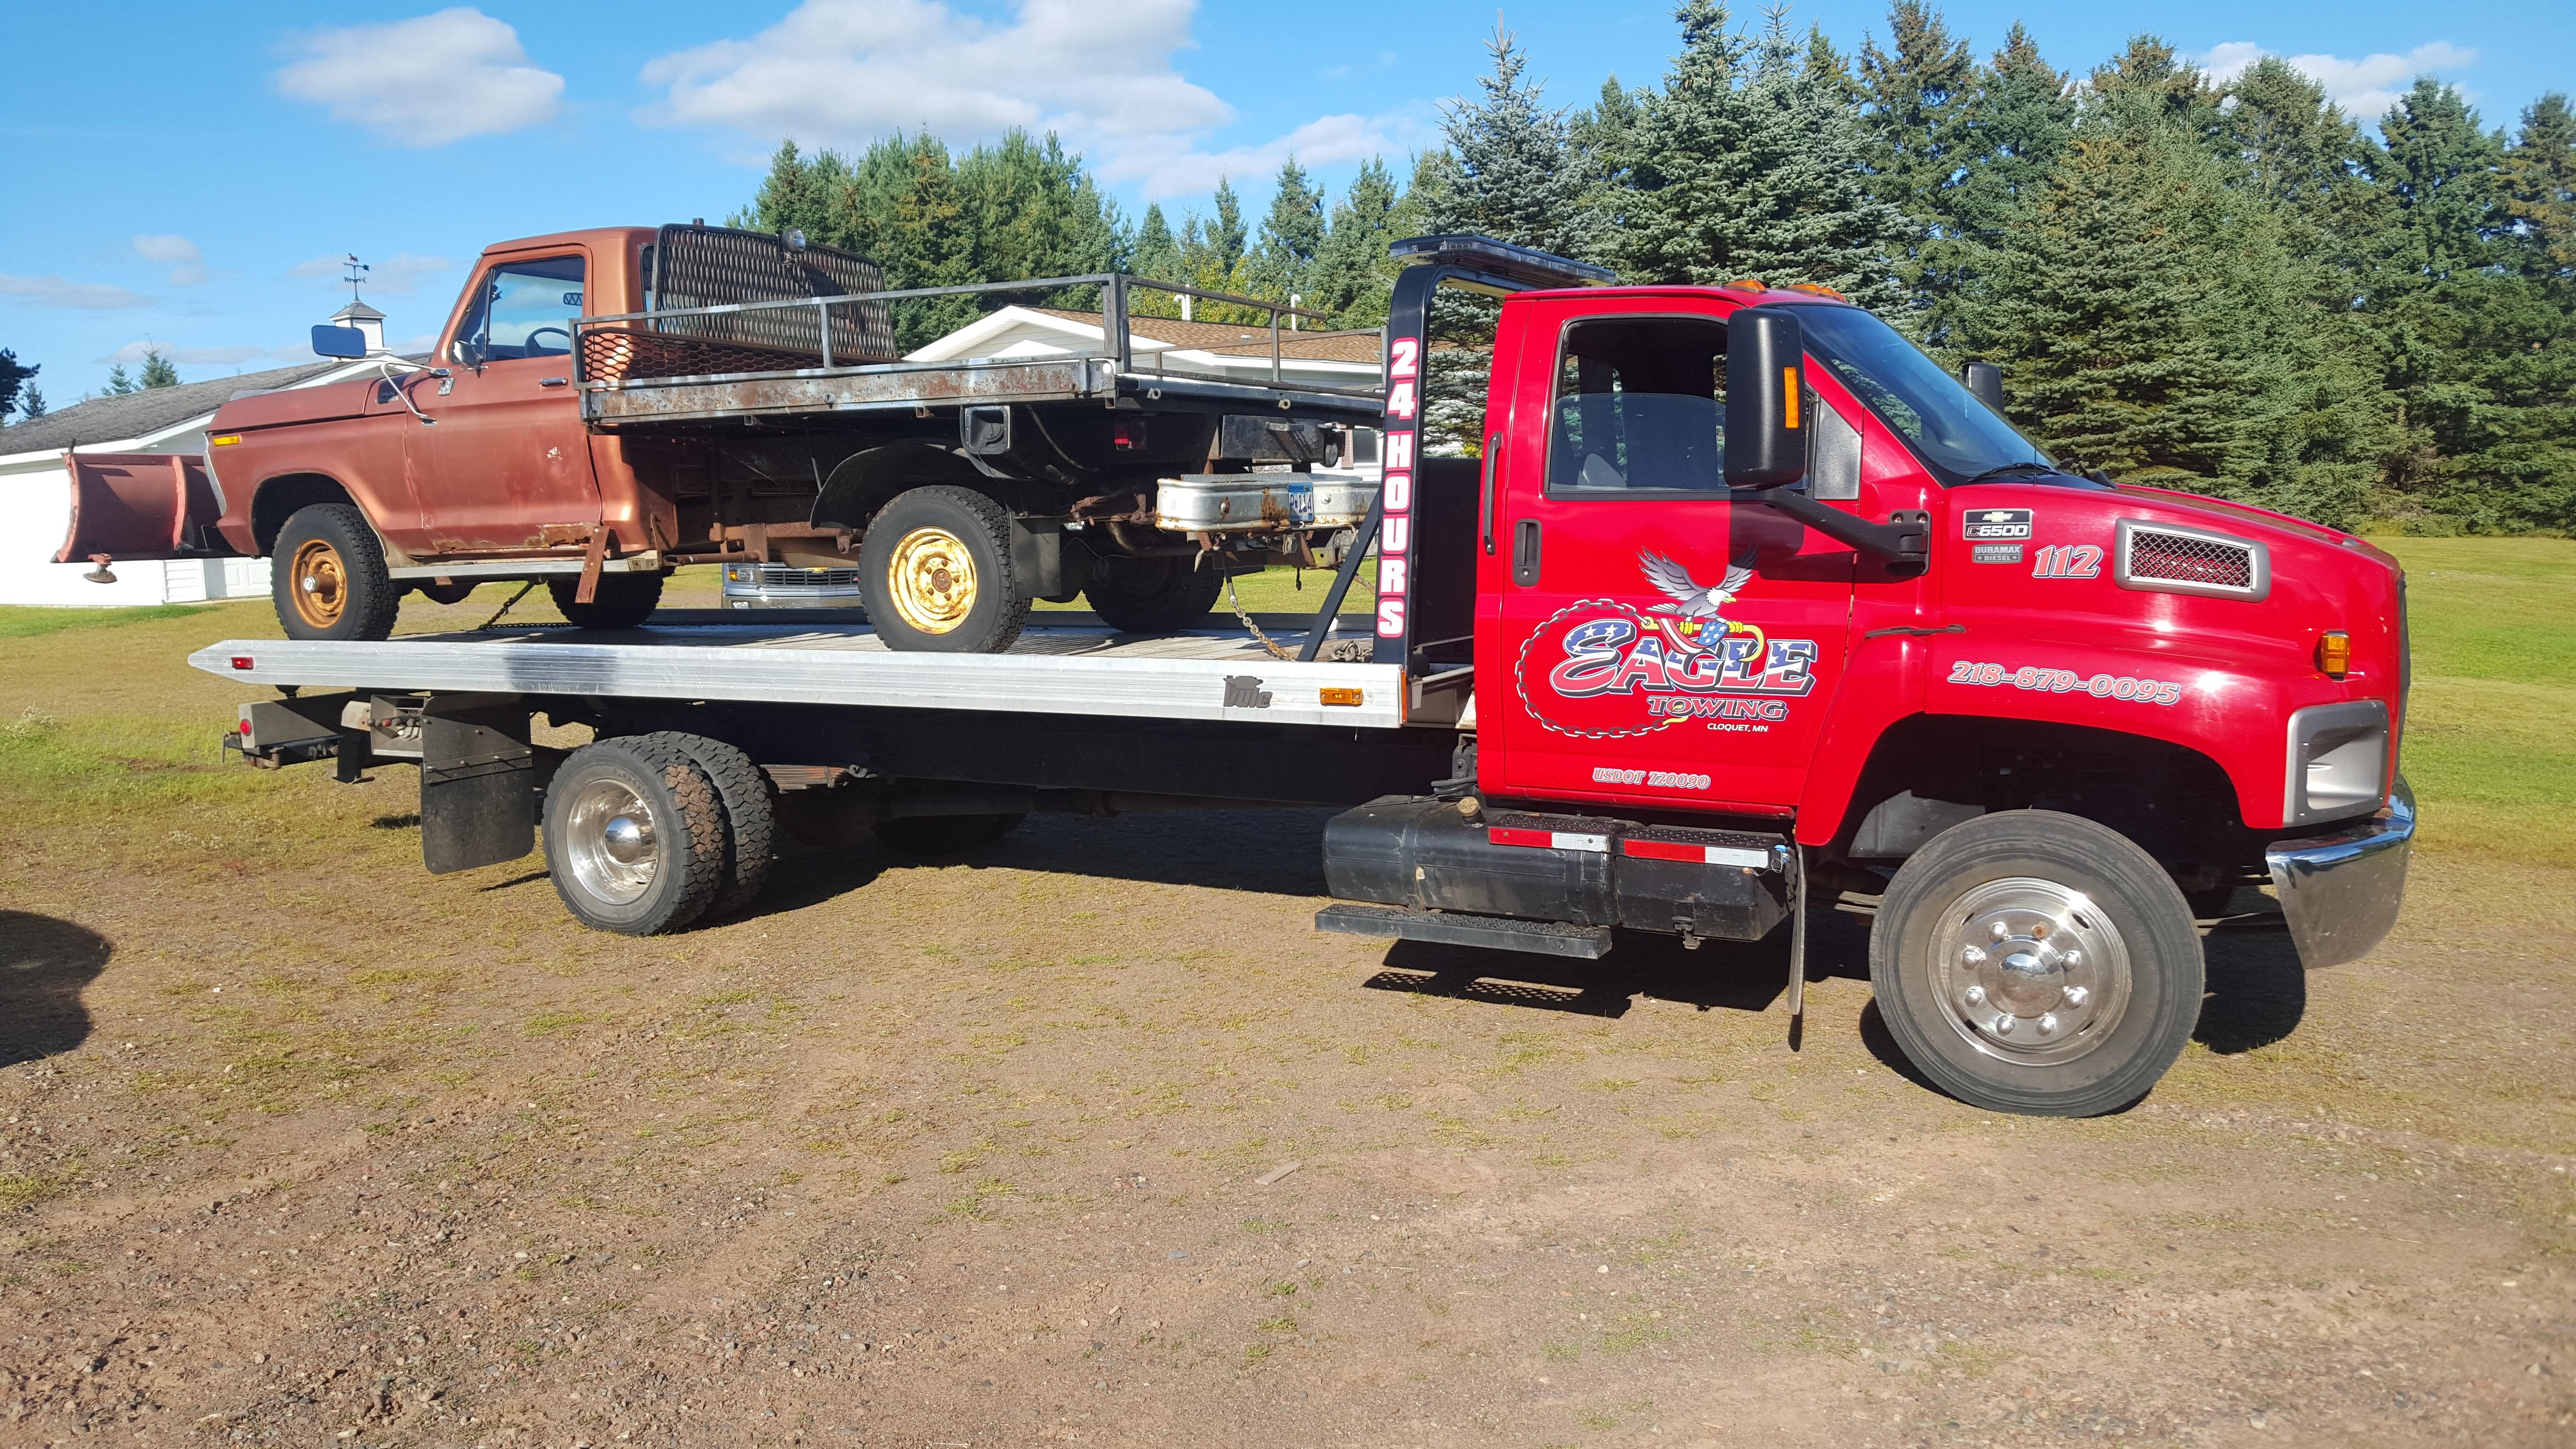 Eagle Towing | (218) 879-0095 | Cloquet, MN | 24 Hour Towing Service | Light Duty Towing | Medium Duty Towing | Heavy Duty Towing | Flatbed Towing | Box Truck Towing | School Bus Towing | Classic Car Towing | Dually Towing | Exotic Towing | Junk Car Removal | Limousine Towing | Winching & Extraction | Wrecker Towing | Luxury Car Towing | Accident Recovery | Equipment Transportation | Moving Forklifts | Scissor Lifts Movers | Boom Lifts Movers | Bull Dozers Movers | Excavators Movers | Compressors Movers | Loadshifts | Wide Loads Transportation | Exotic Car & Sport Car Towing | Long Distance Towing | Auto Transport | Tipsy Towing | Lockouts | Fuel Delivery | Jump Starts | Roadside Assistance | Motorcycle Towing | Tire Service | Private Property Impound (Non-Consensual Towing)